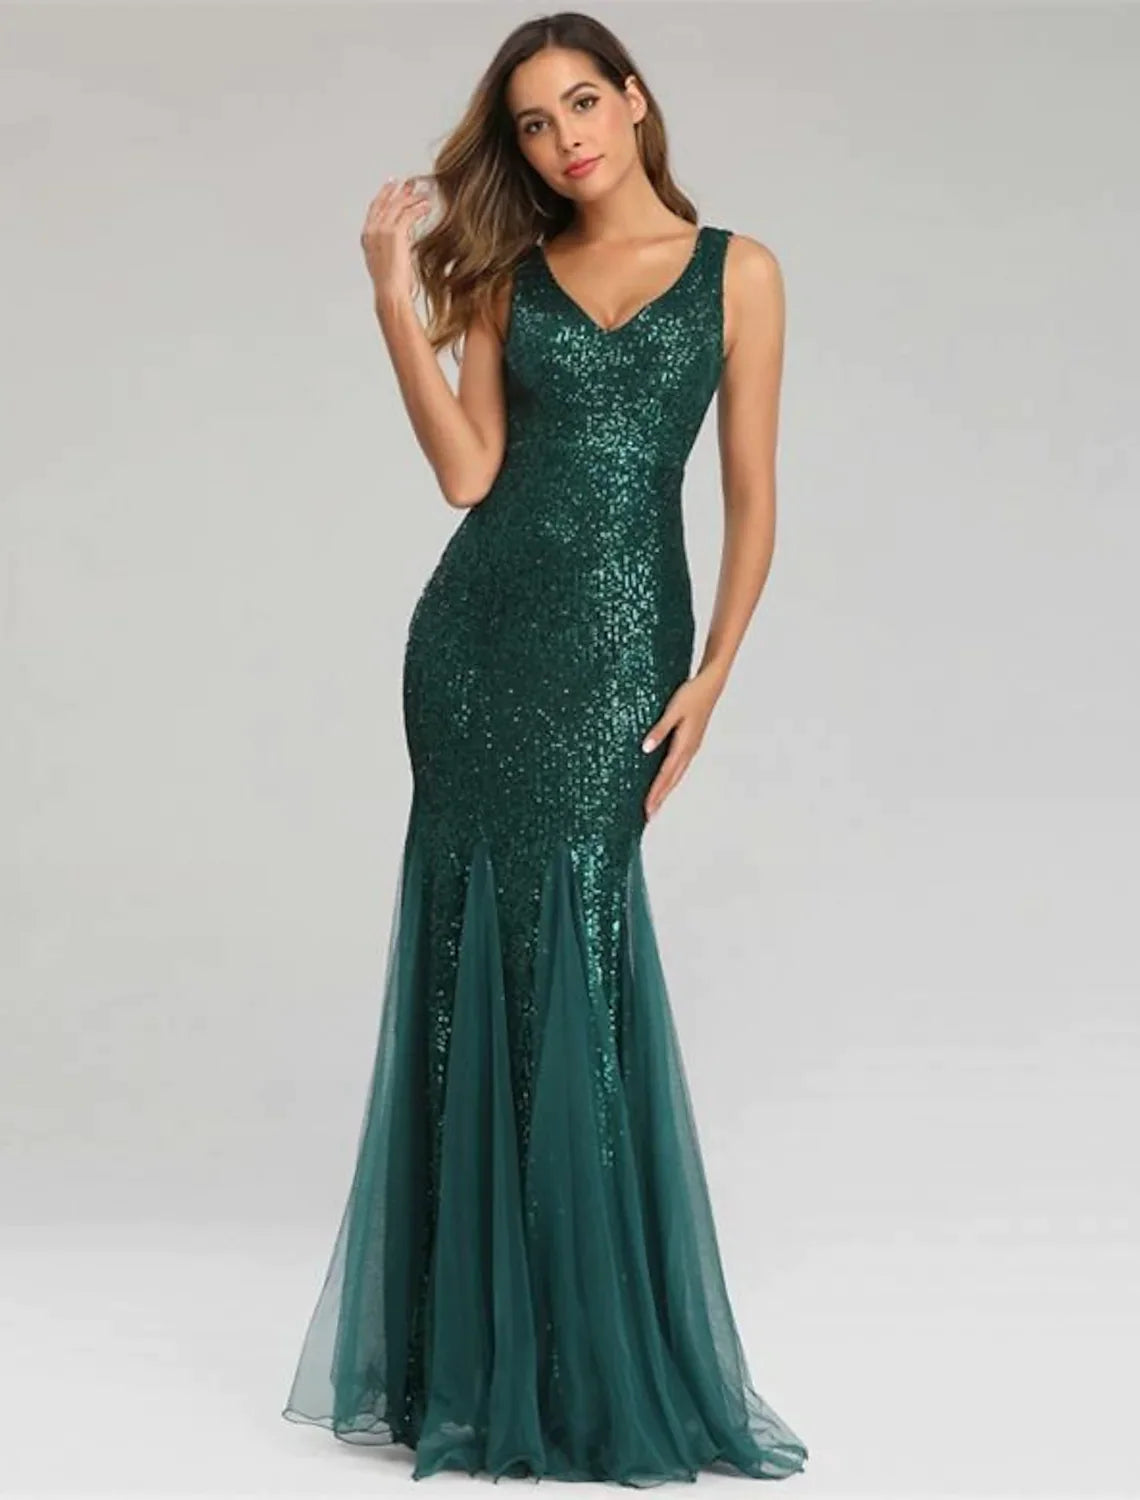 Sparkle Sexy Party Wear Formal Evening Dress 